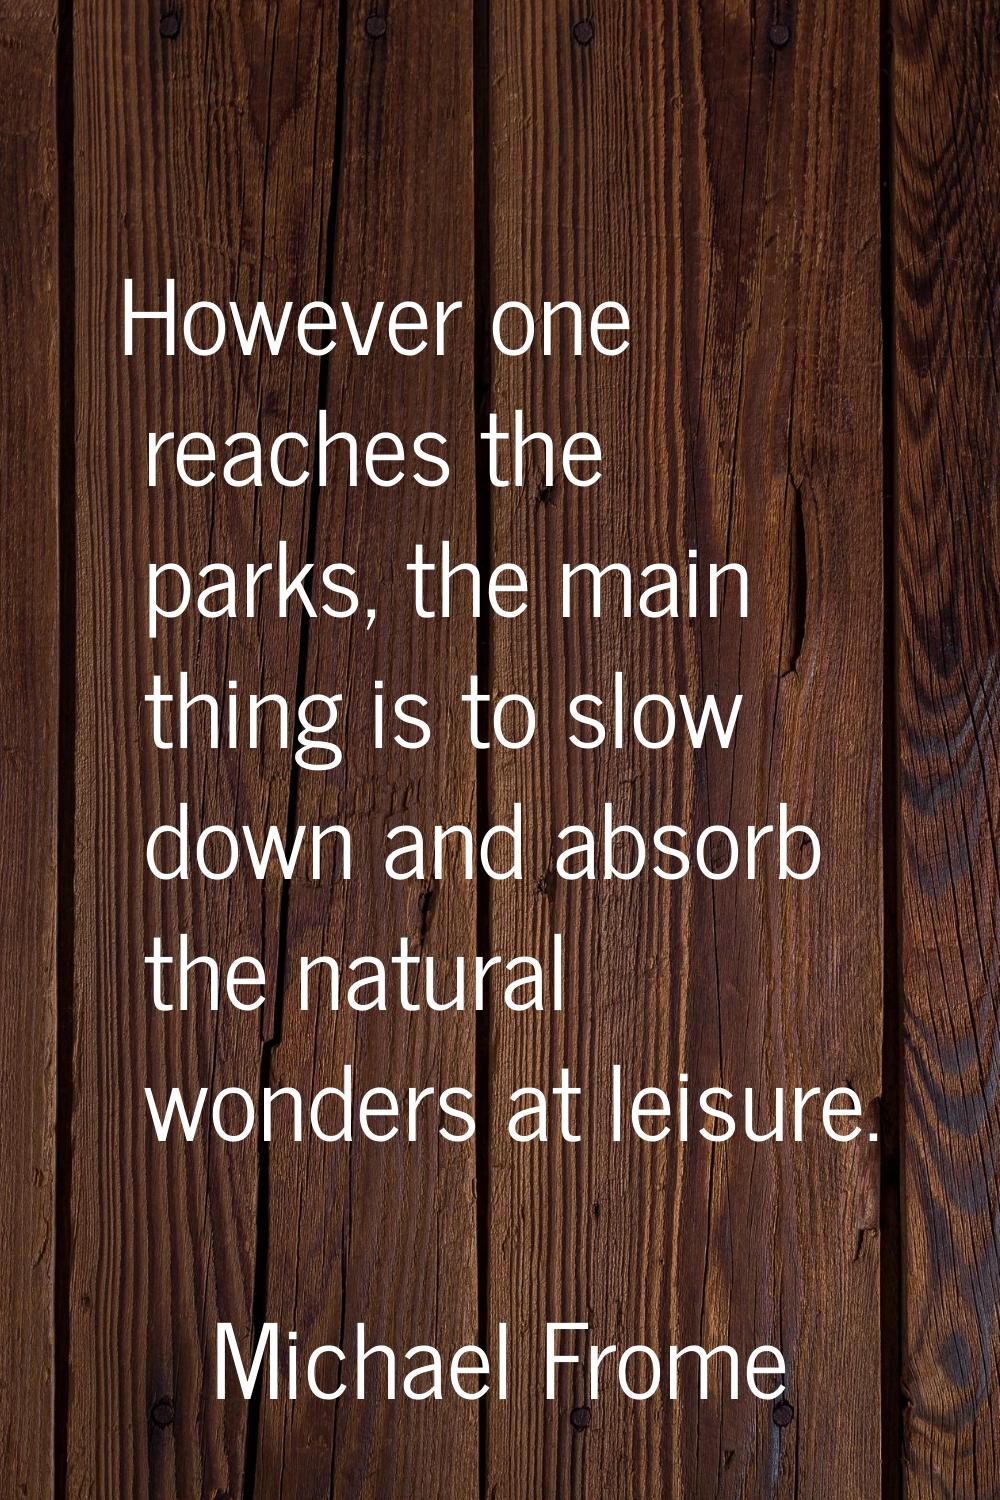 However one reaches the parks, the main thing is to slow down and absorb the natural wonders at lei